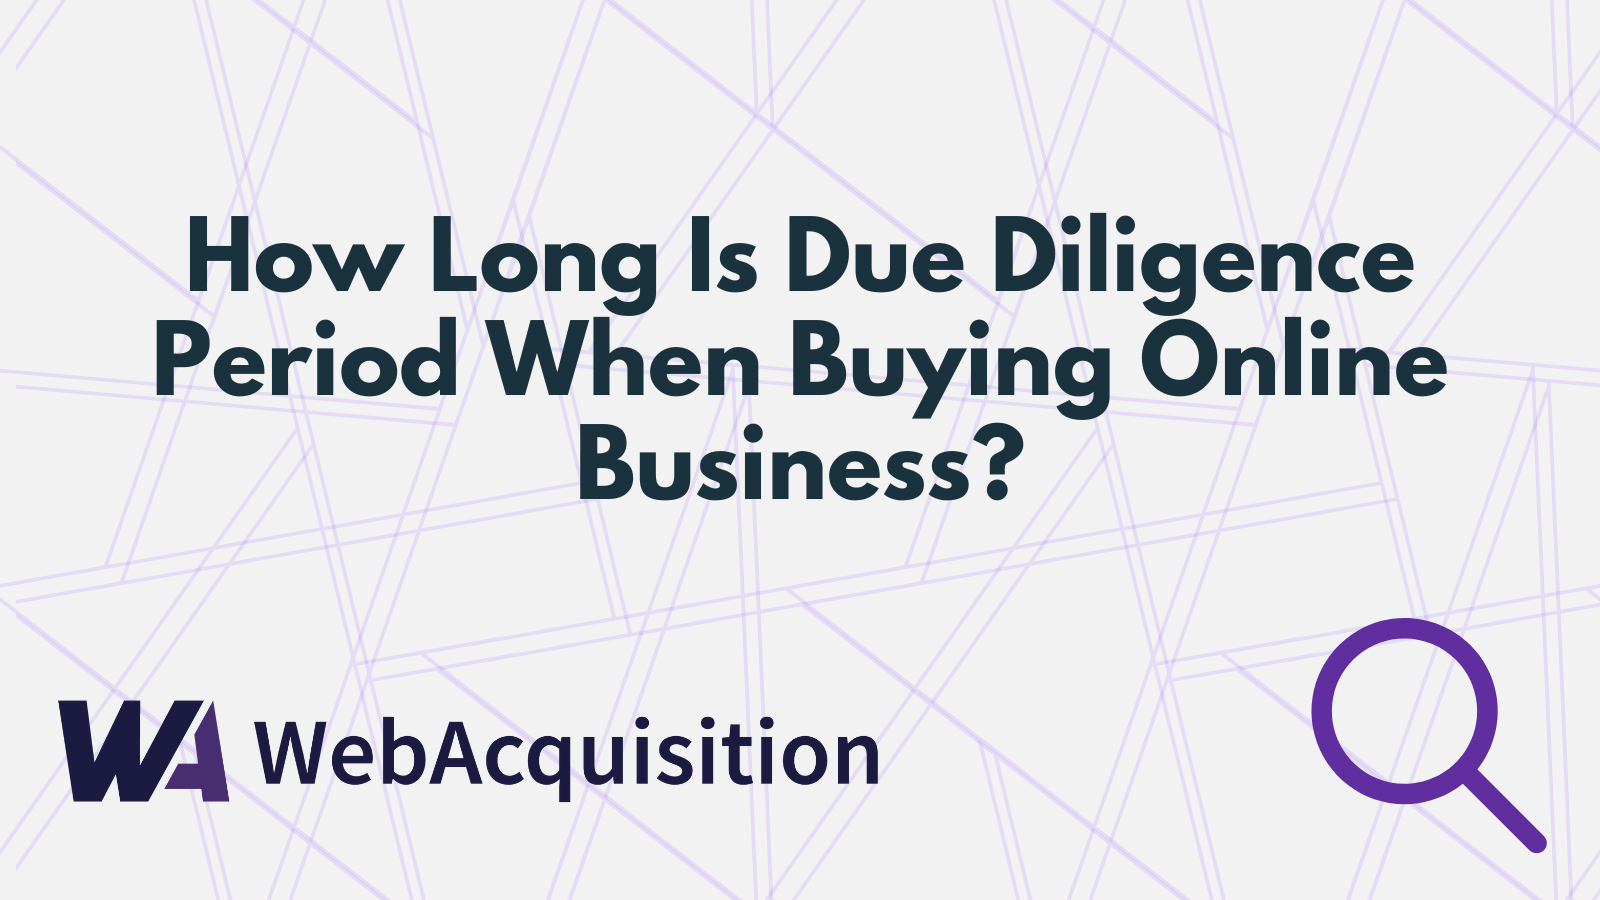 How Long Is Due Diligence Period When Buying Online Business?